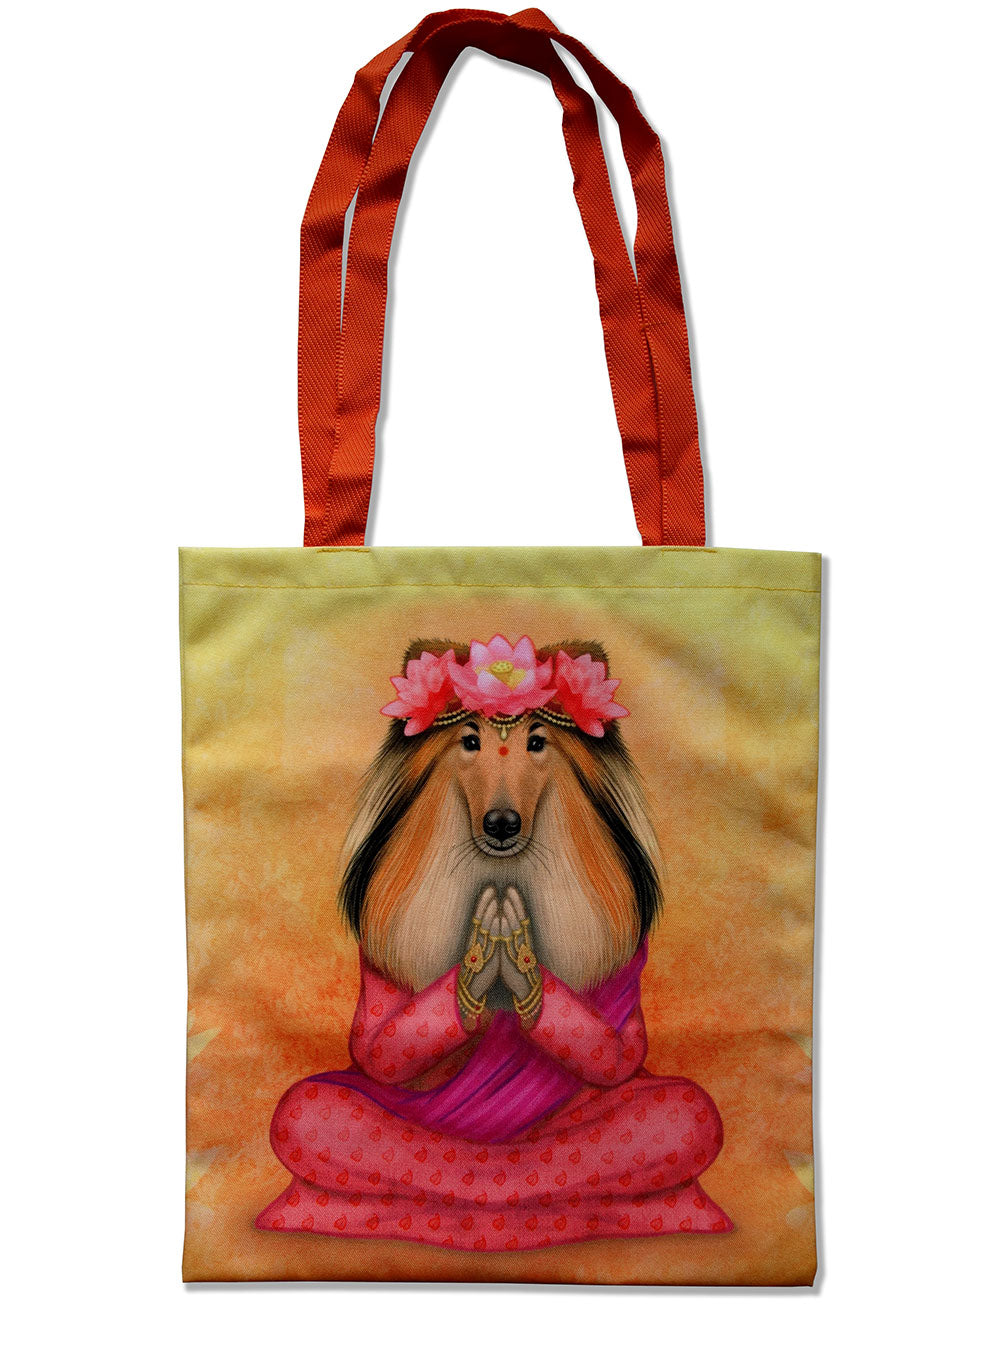 Tote bag "What we think, we become" (Rough Collie)